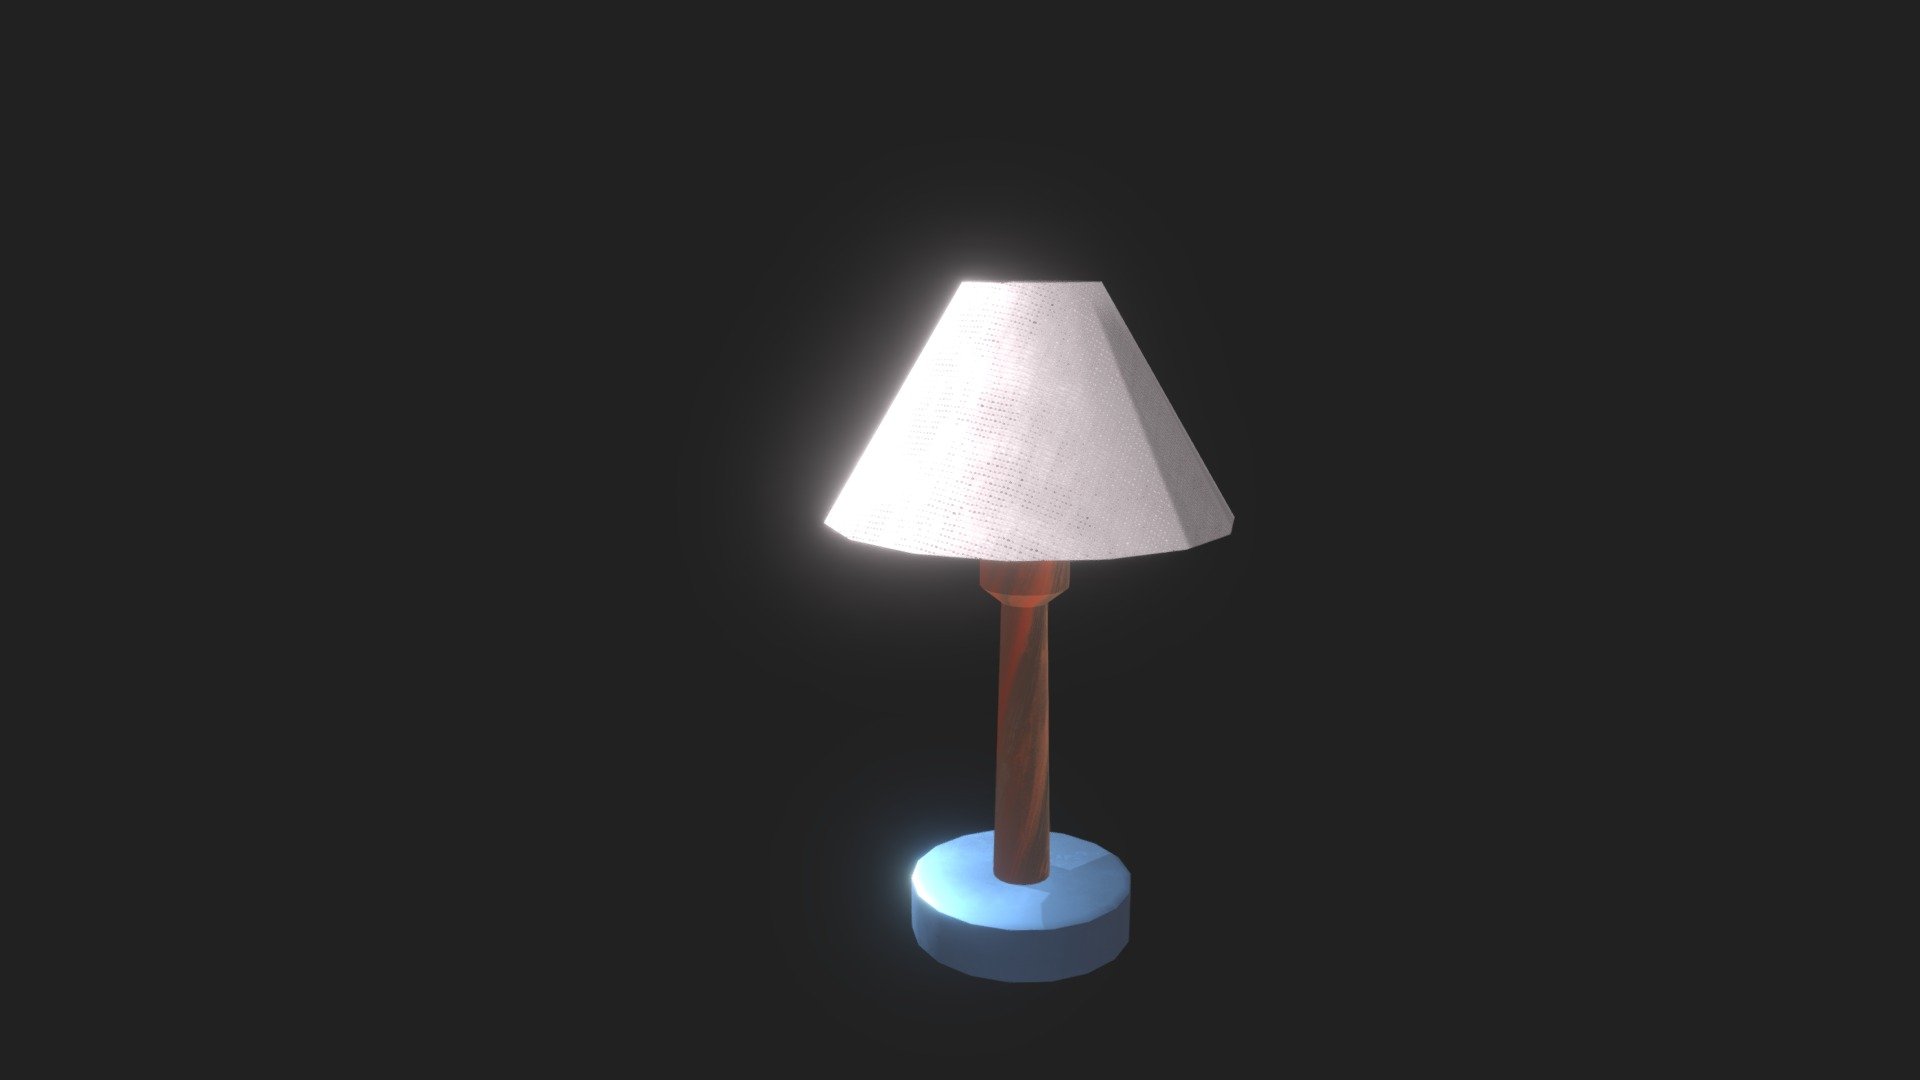 Poorly made lamp